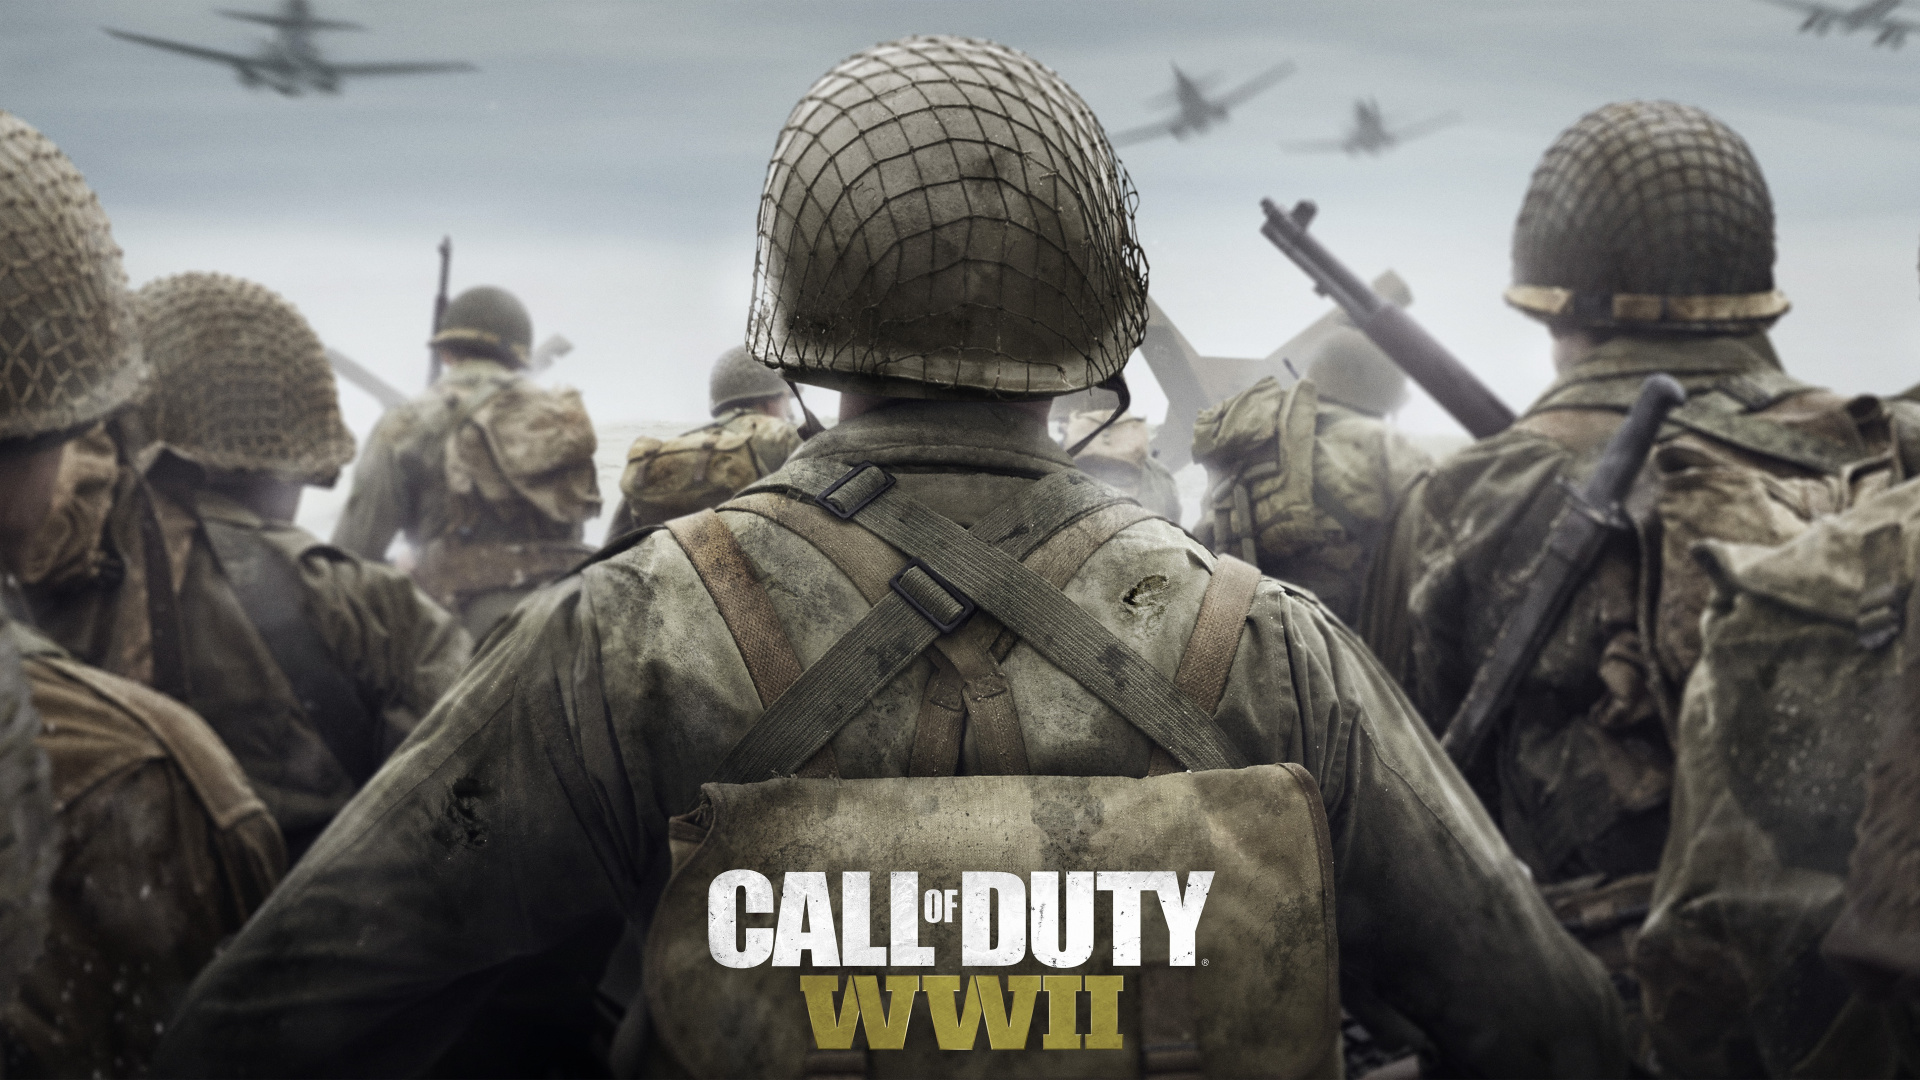 Call of Duty Ww2, Call of Duty WWII, Activision, Sledgehammer Games, Soldat. Wallpaper in 1920x1080 Resolution